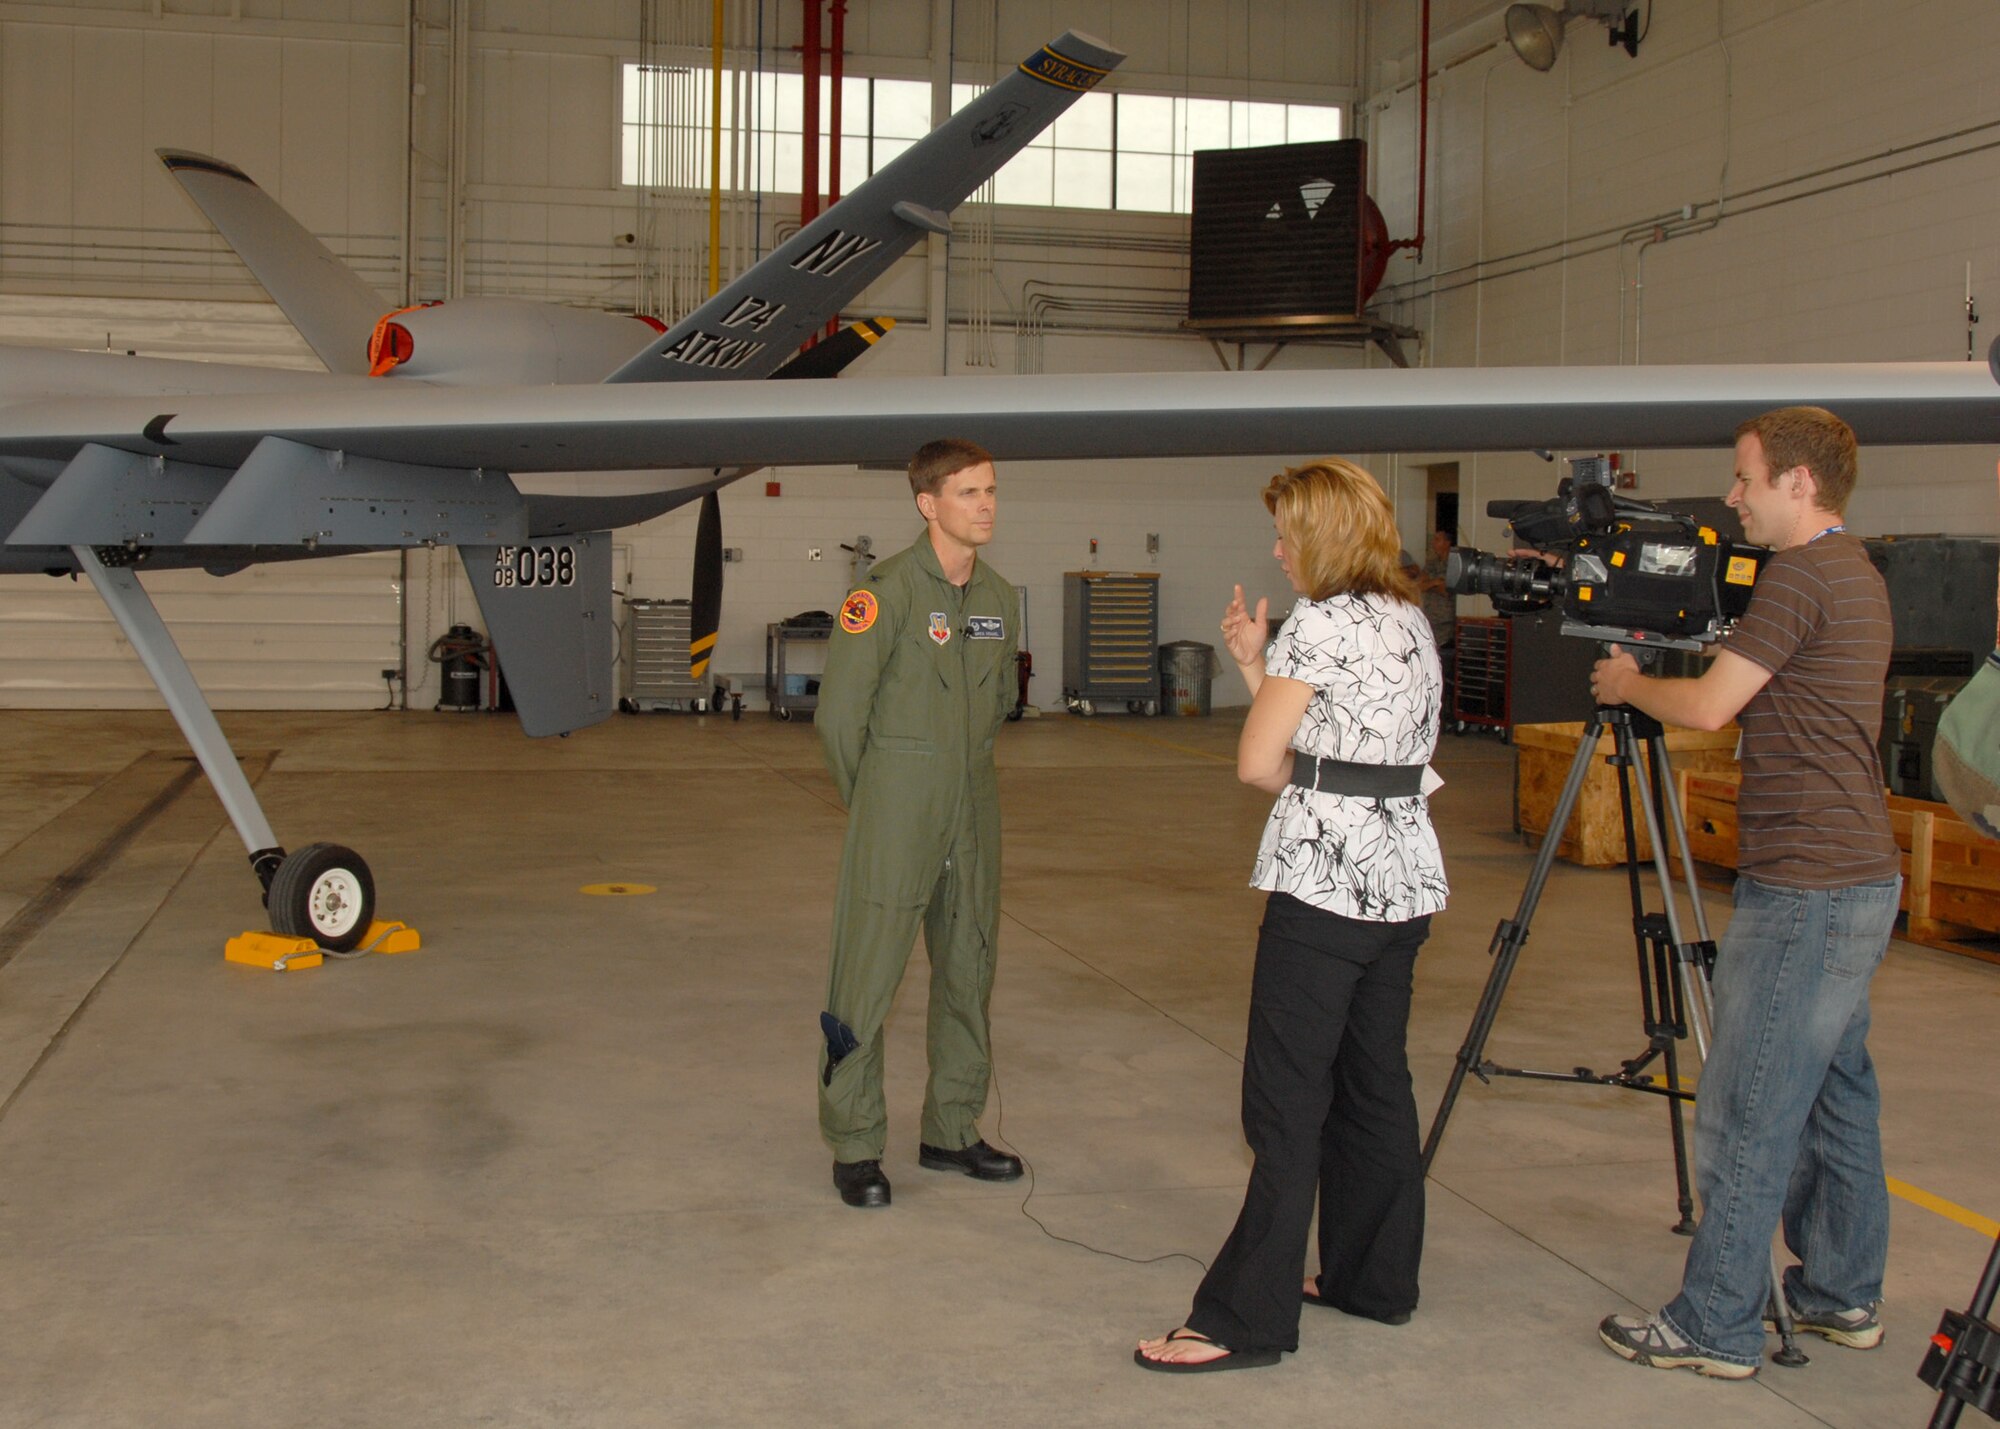 News 10 Now, Syracuse, Reporter Joleene Des Rosiers interviews New York Air National Guard, 174th Fighter Wing Operations Group Commander, Col. Greg Semmel in front of an MQ-9 Reaper Unmanned Aerial Vehicle at Hancock Field in Syracuse, NY, on 26 June 2009. Semmel was answering questions about the new 
MQ-9 Reaper UAV mission of the 174th Fighter Wing. (US Air Force photo by Tech. Sgt. Jeremy M. Call/Released)